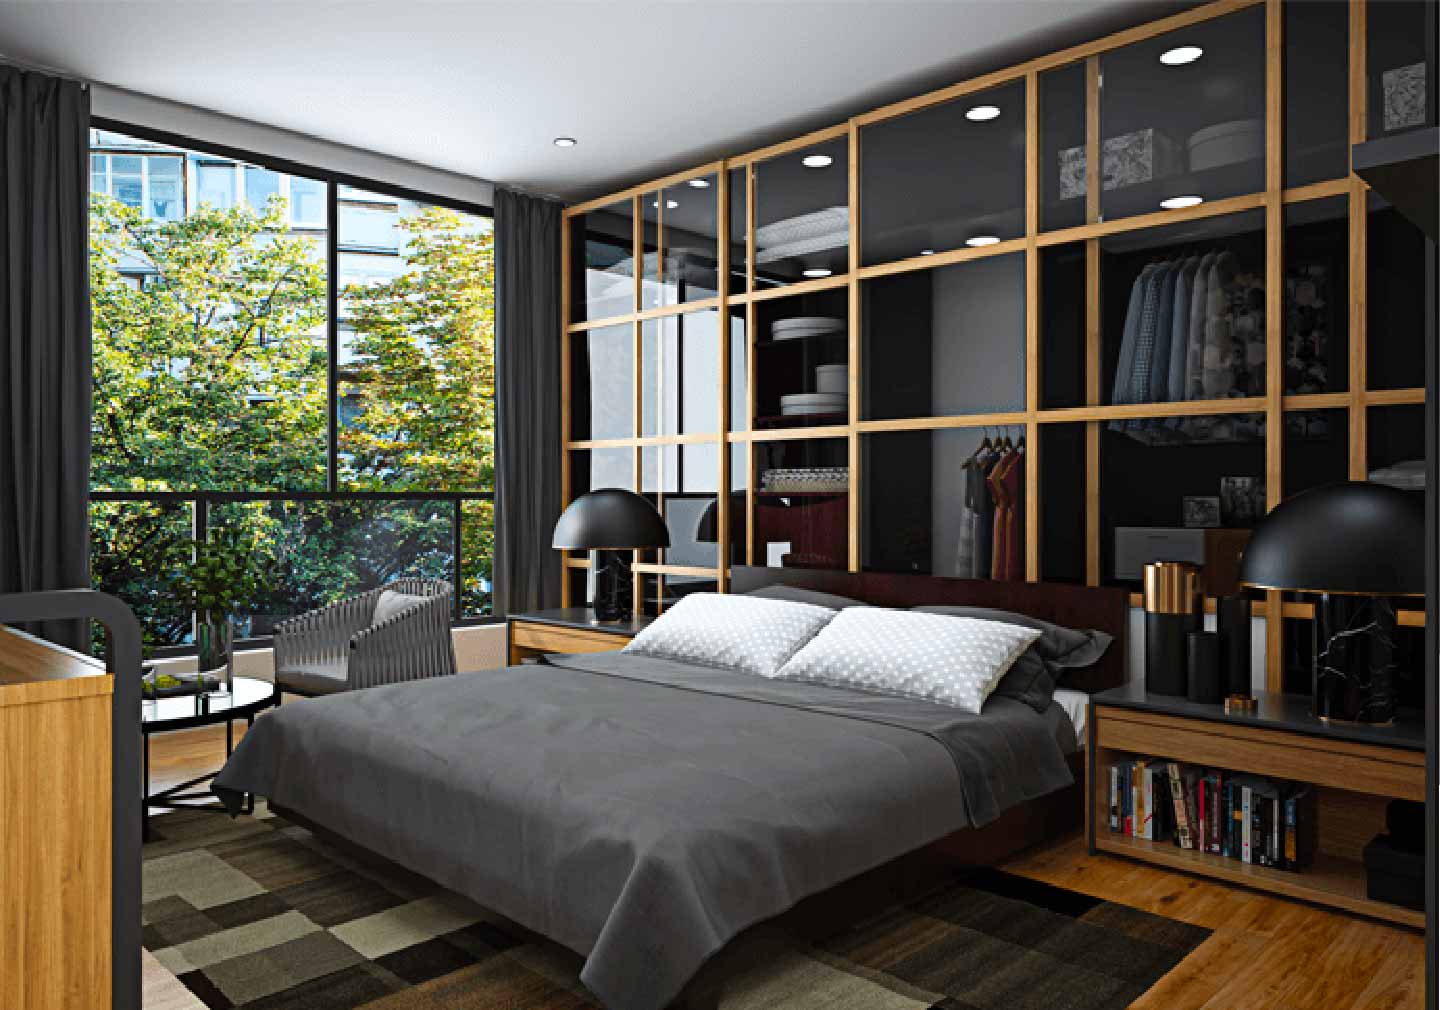 Glass and Mirrors - Bedroom Interior Design